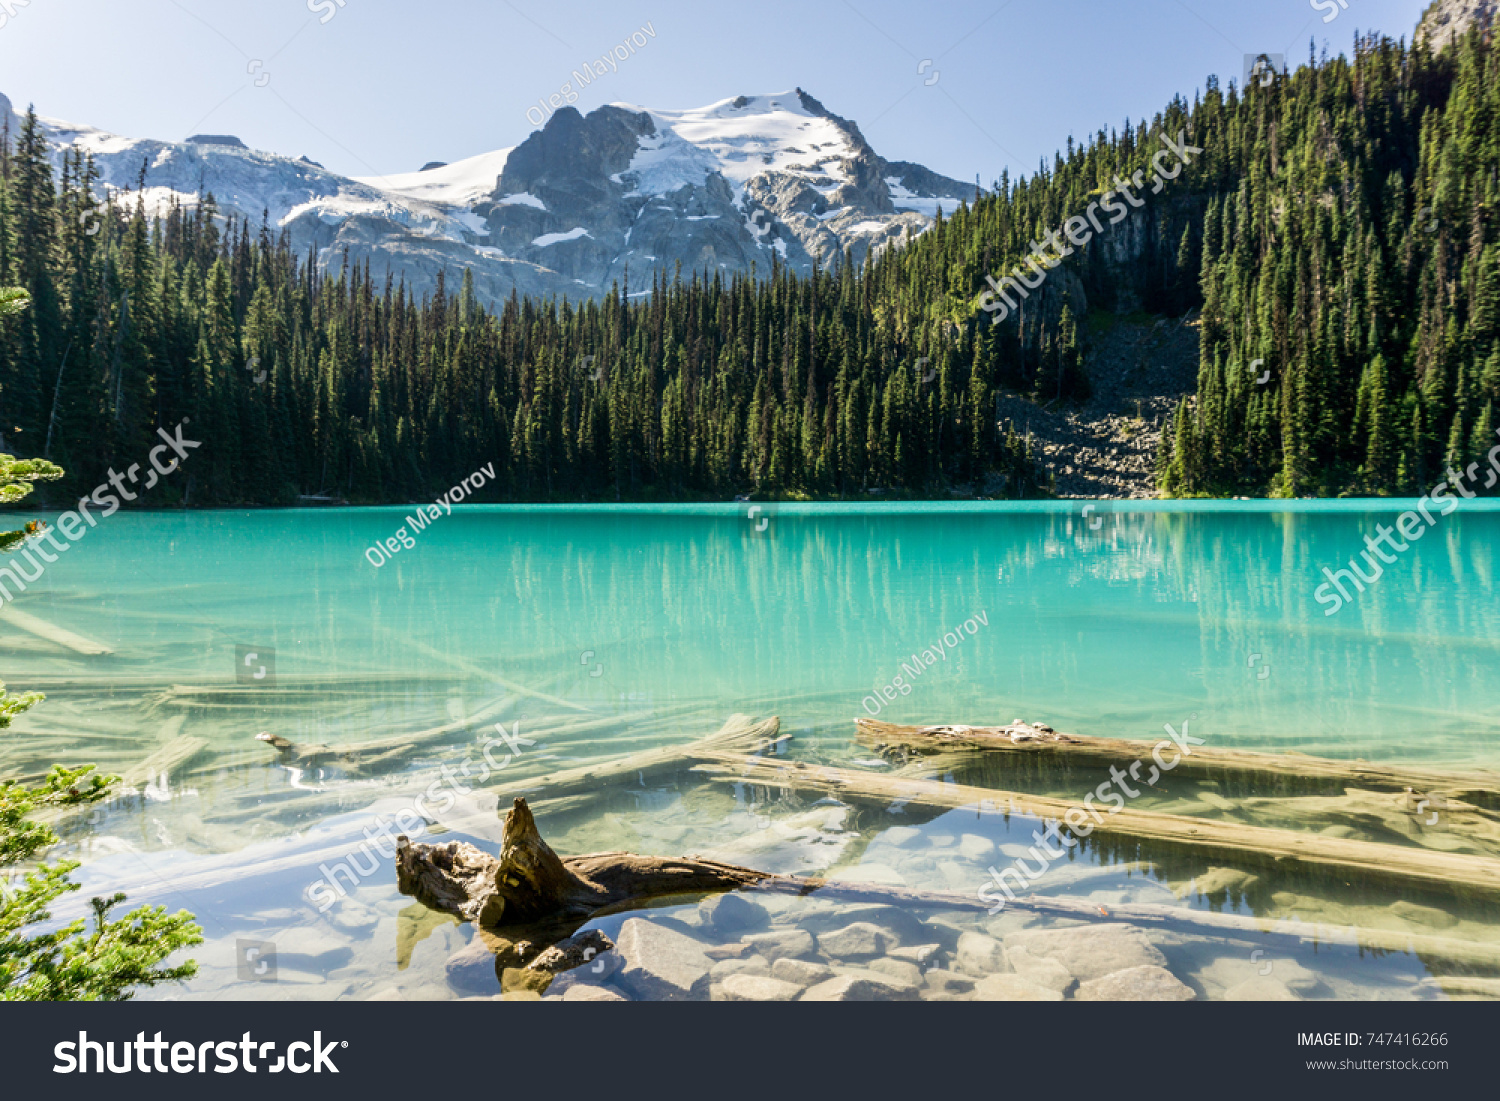 Joffre Lake in British Columbia, Canada at day time #747416266